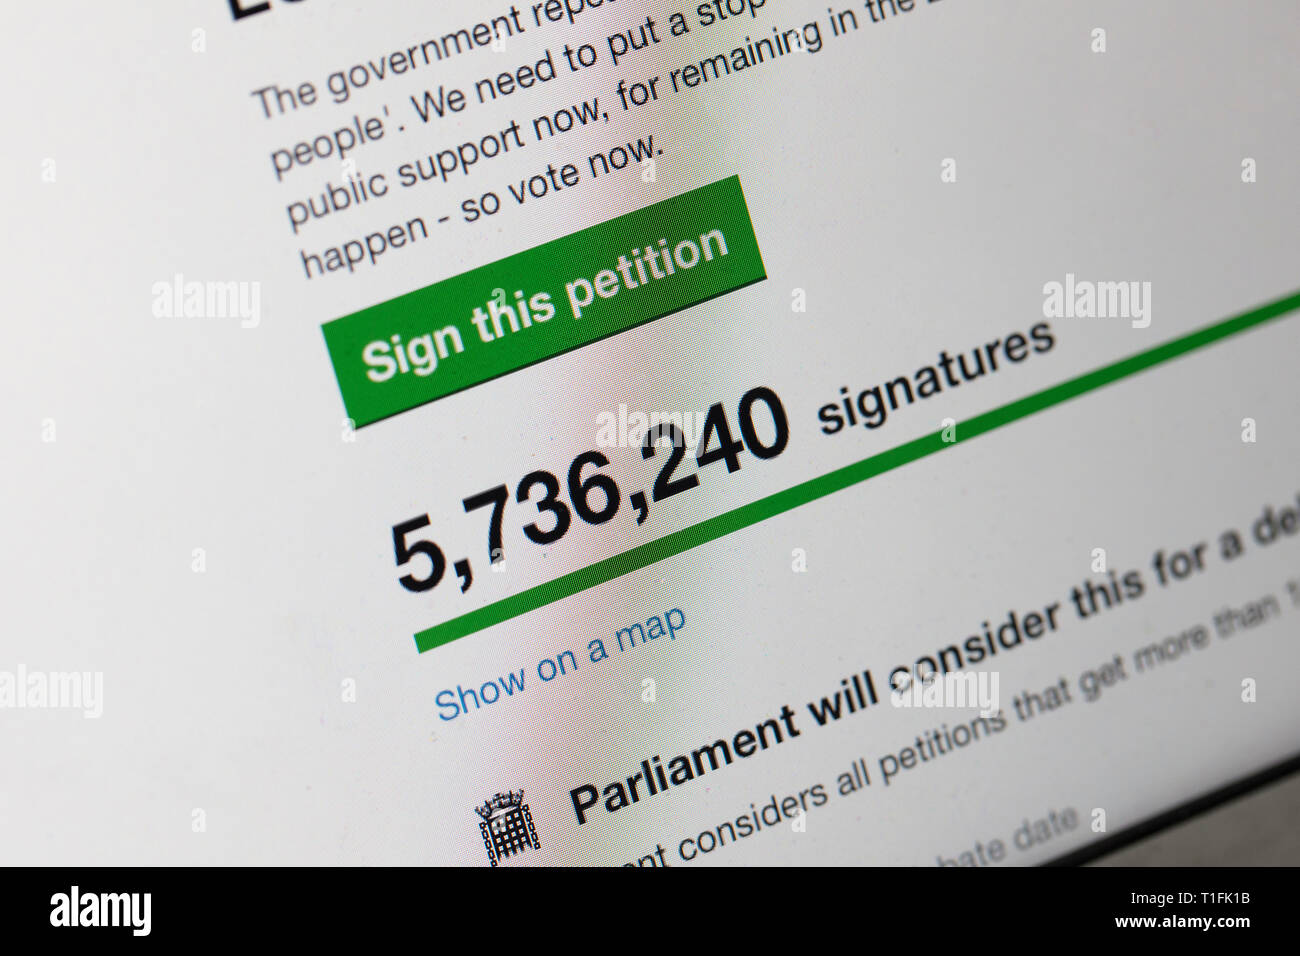 LONDON, UK - March 26th 2019:  Online petition to revoke article 50 and reconsider brexit has over 5 million signatures Stock Photo